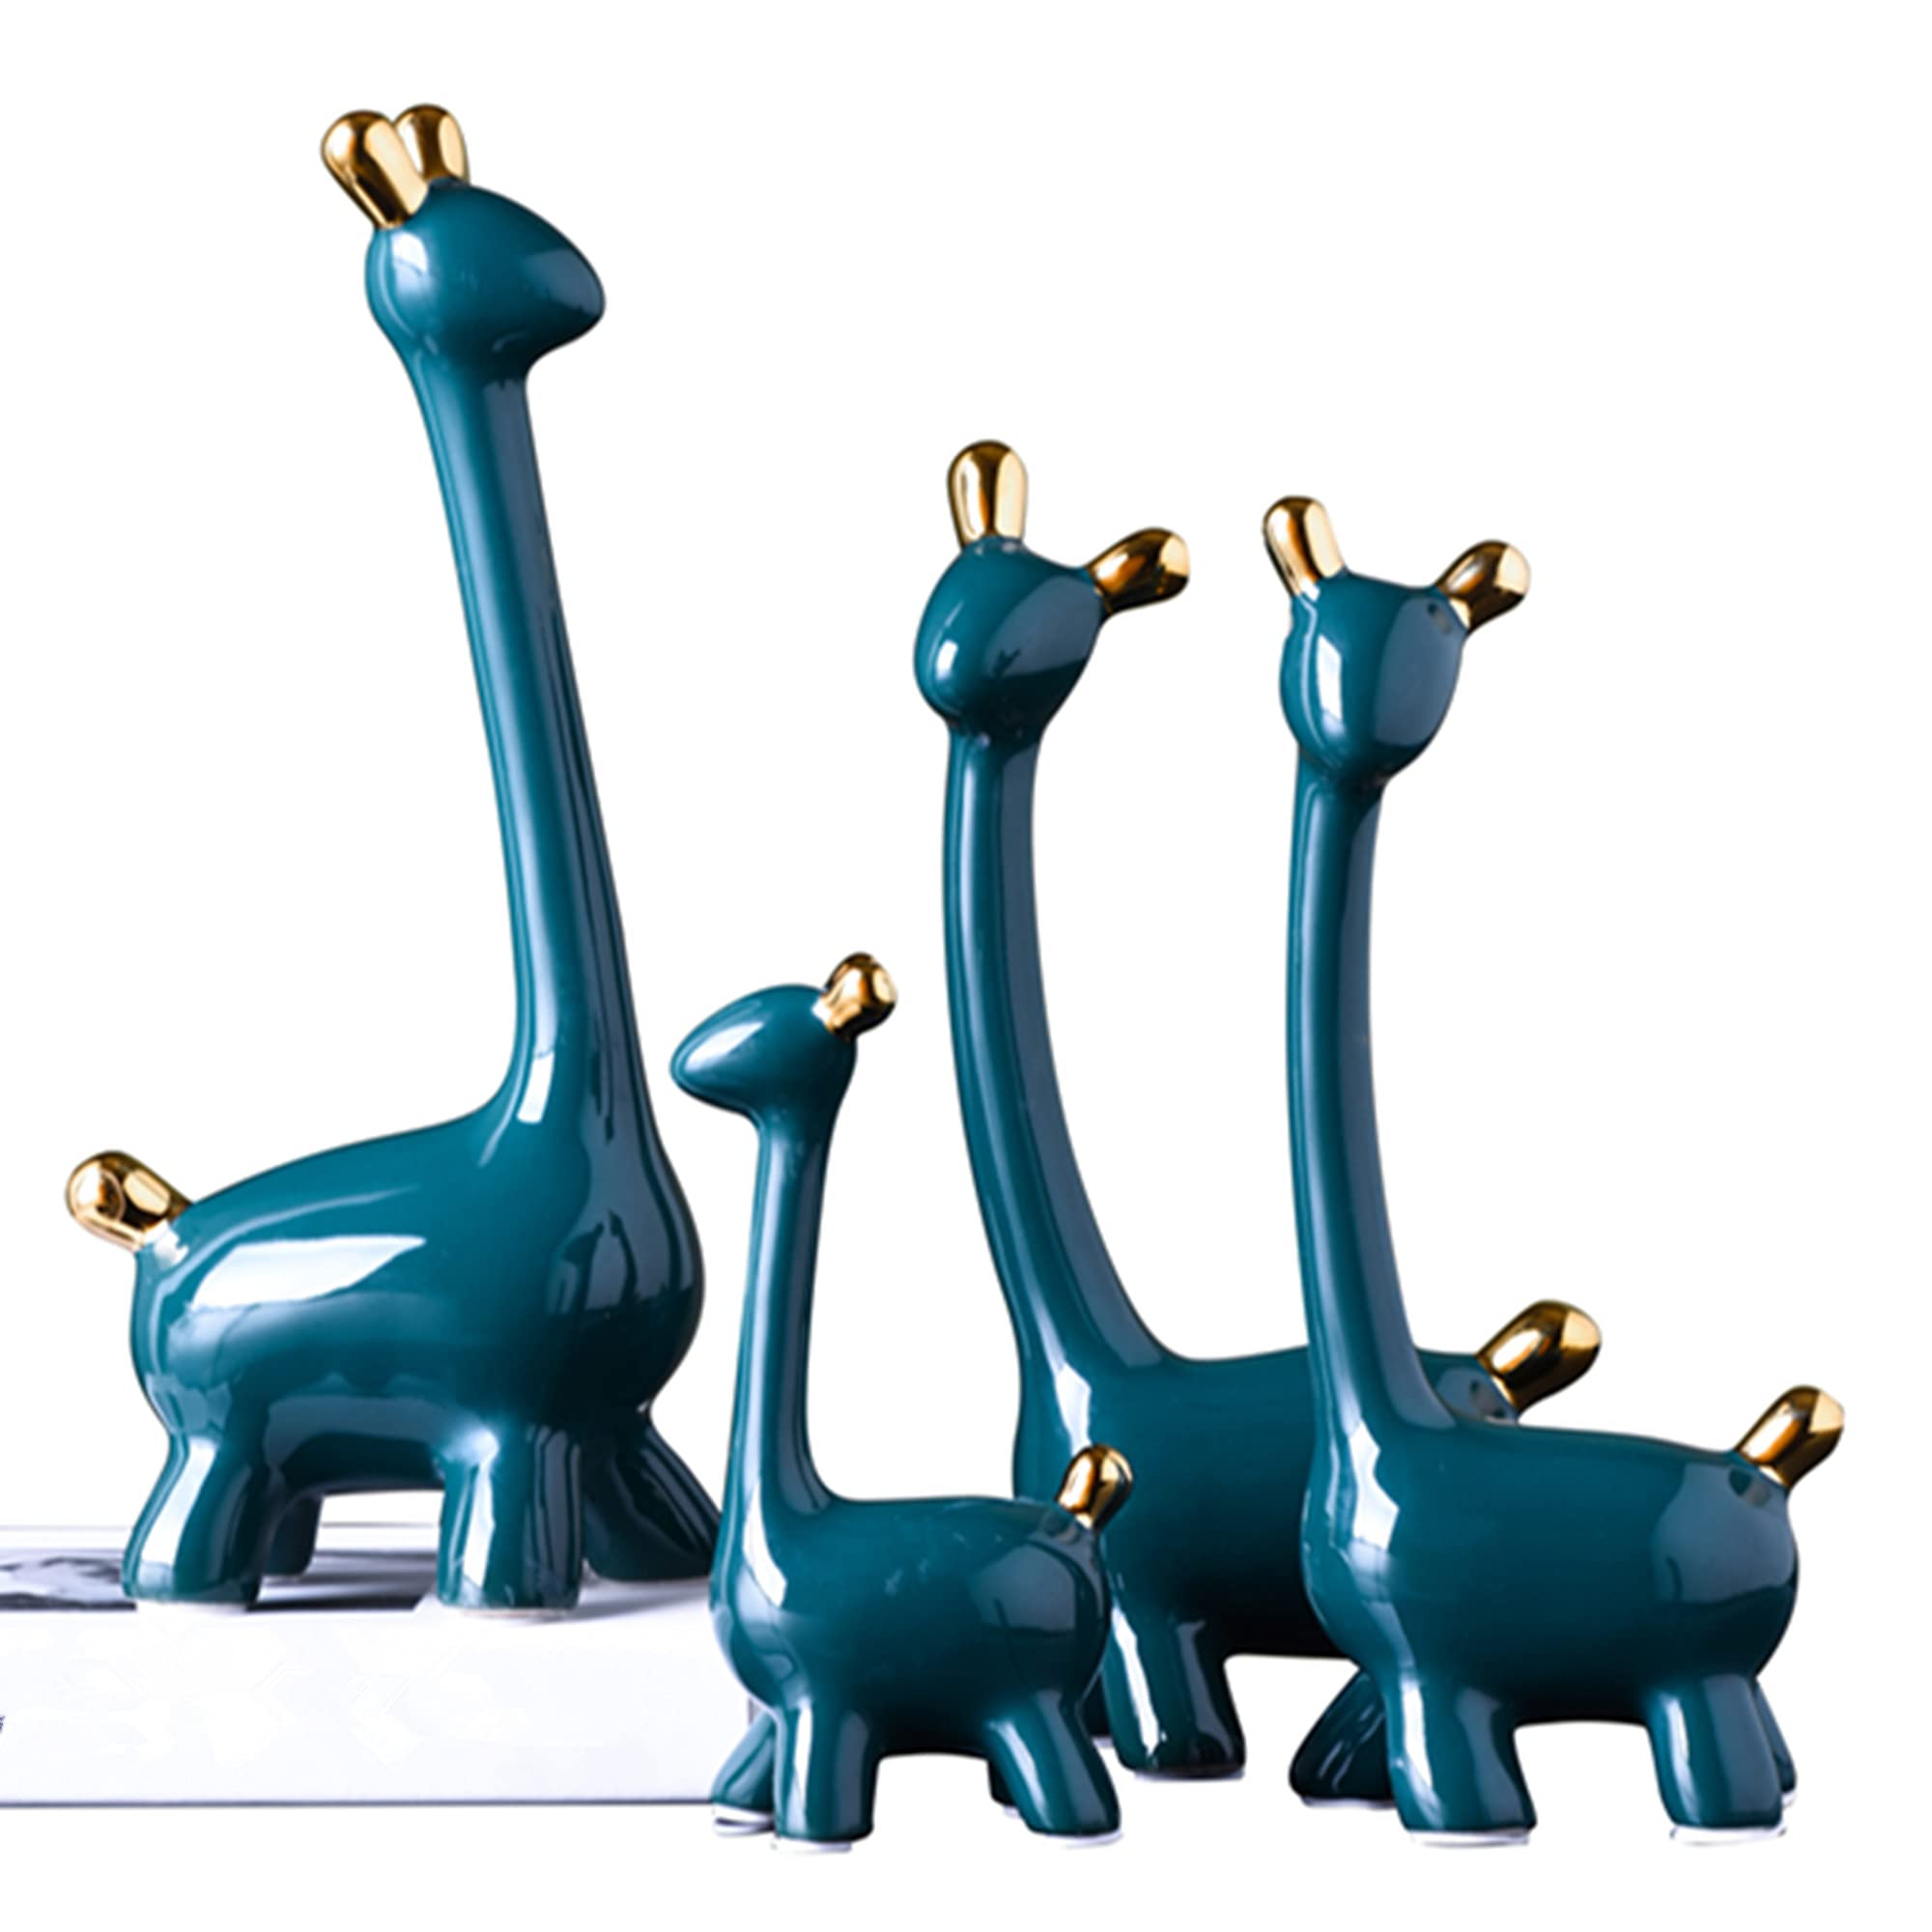 MAYIAHO Ceramics Giraffe Statues for Home Decor Modern Figurines Sculptures Green Large Small Deer Center Table Living Room 4pcs Big Shelf Accents ...